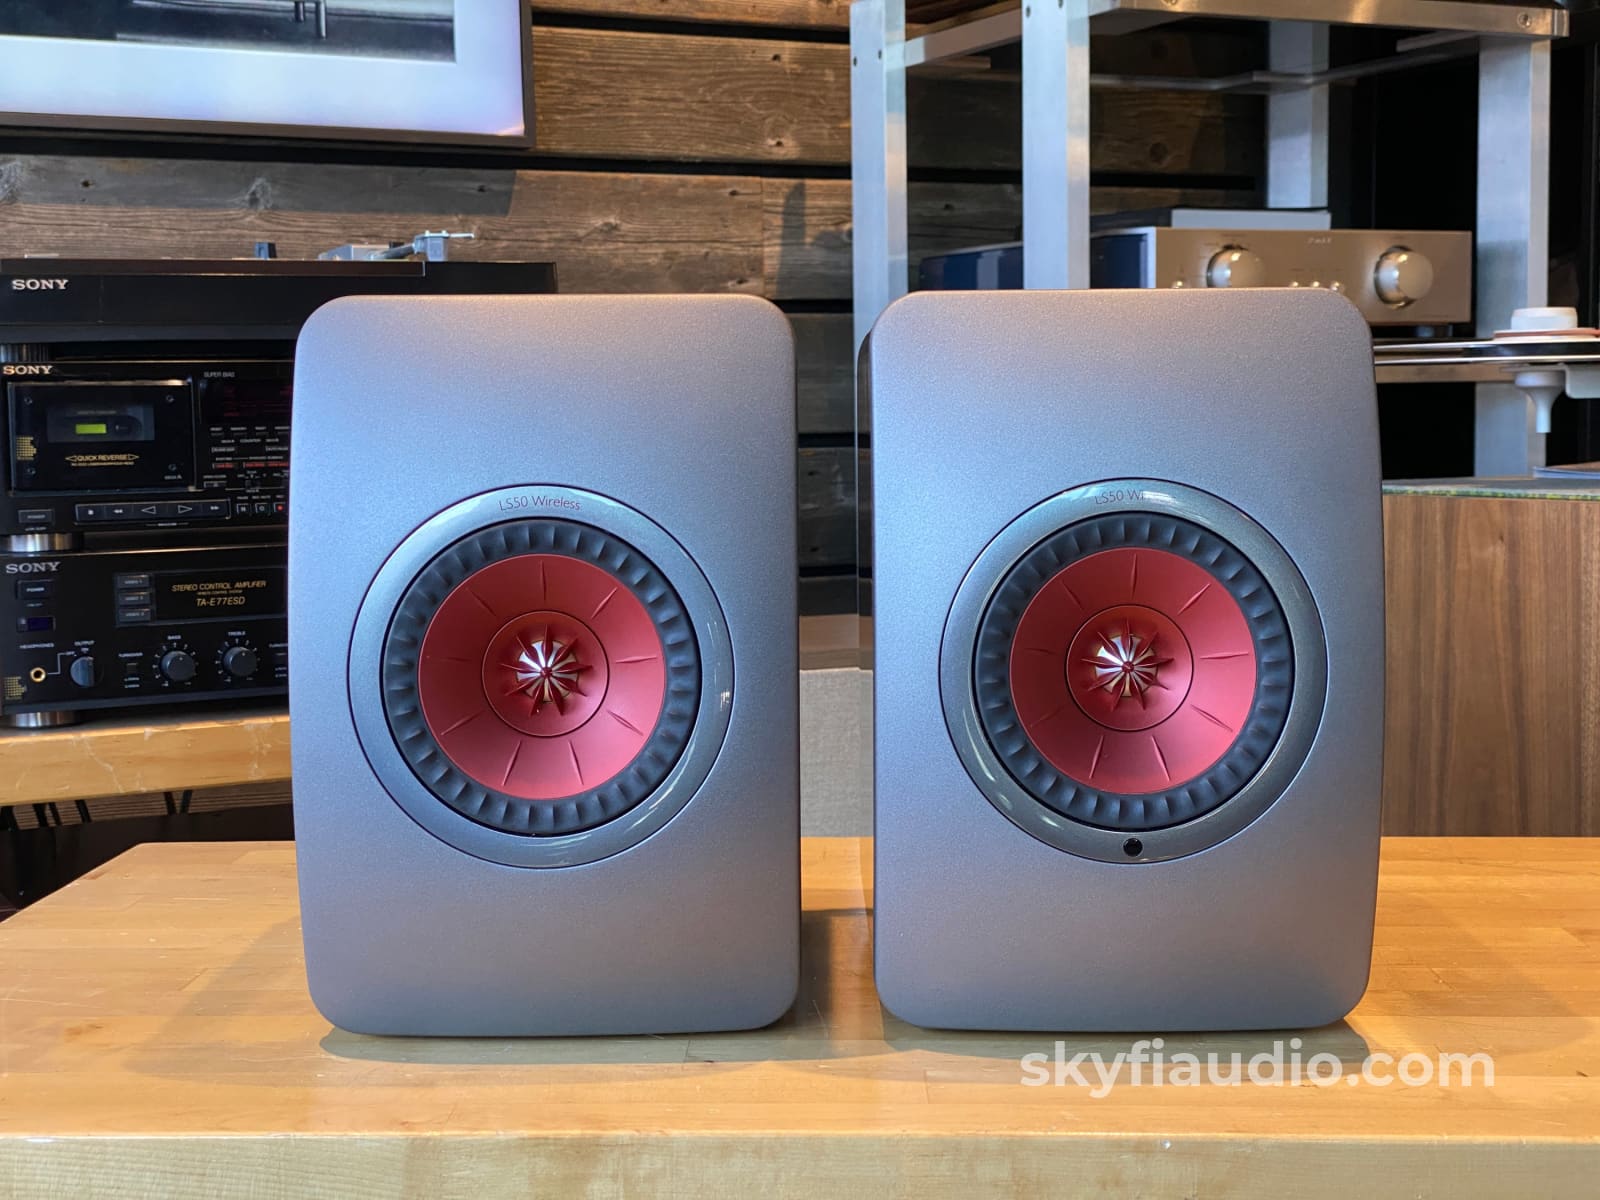 Kef Ls50 Wireless Speakers (V1) With Matching Stands - Latest Software